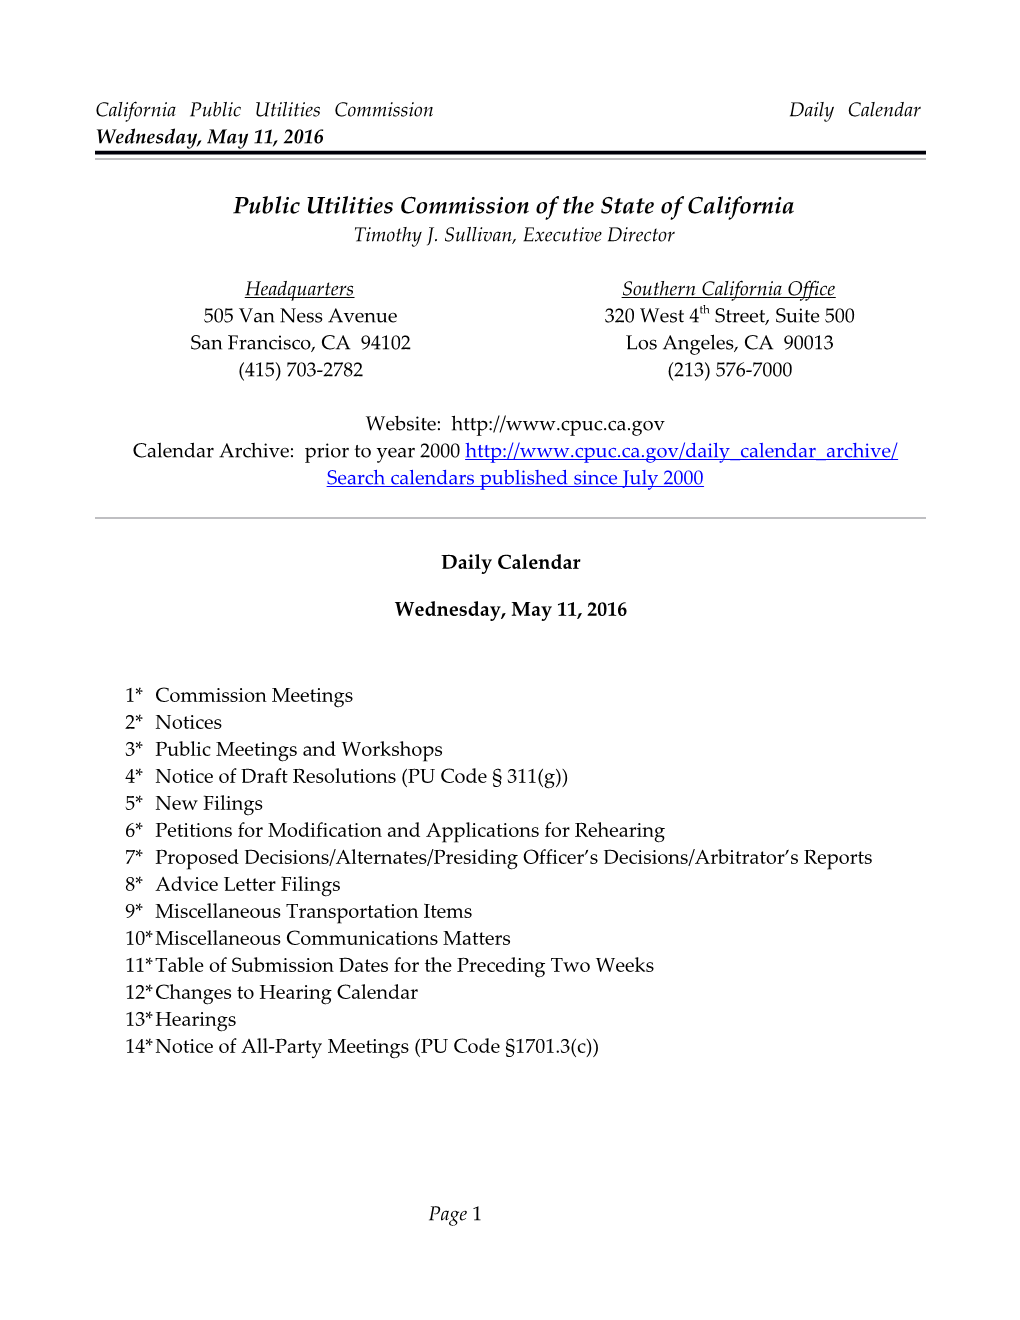 California Public Utilities Commission Daily Calendar Wednesday, May11, 2016